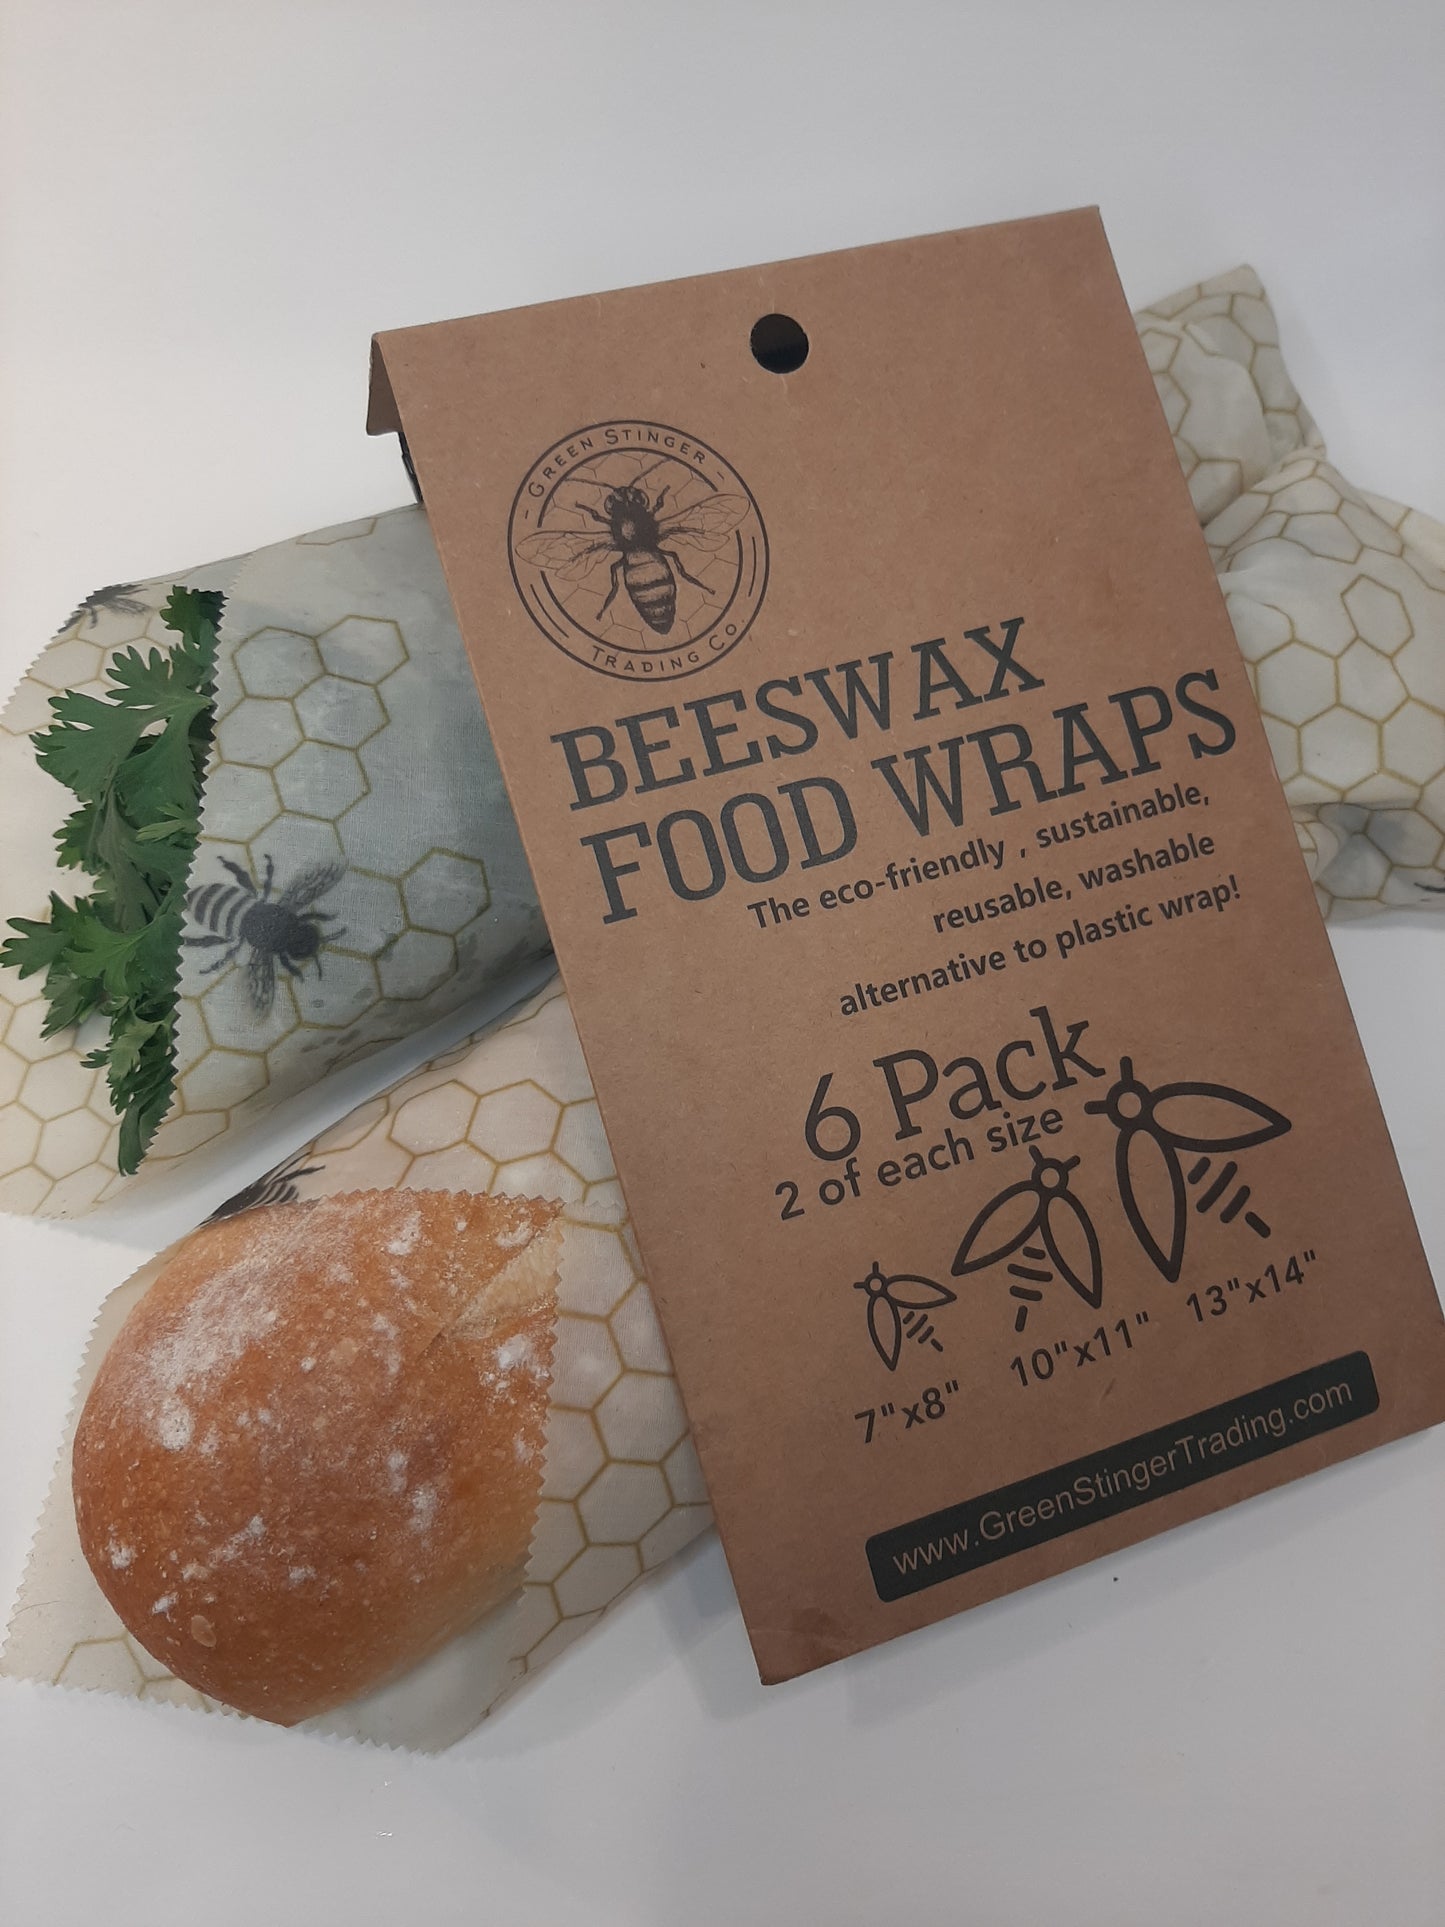 Beeswax Food Wraps. Set of 6 Natural, Biodegradable, Sustainable and Reusable!